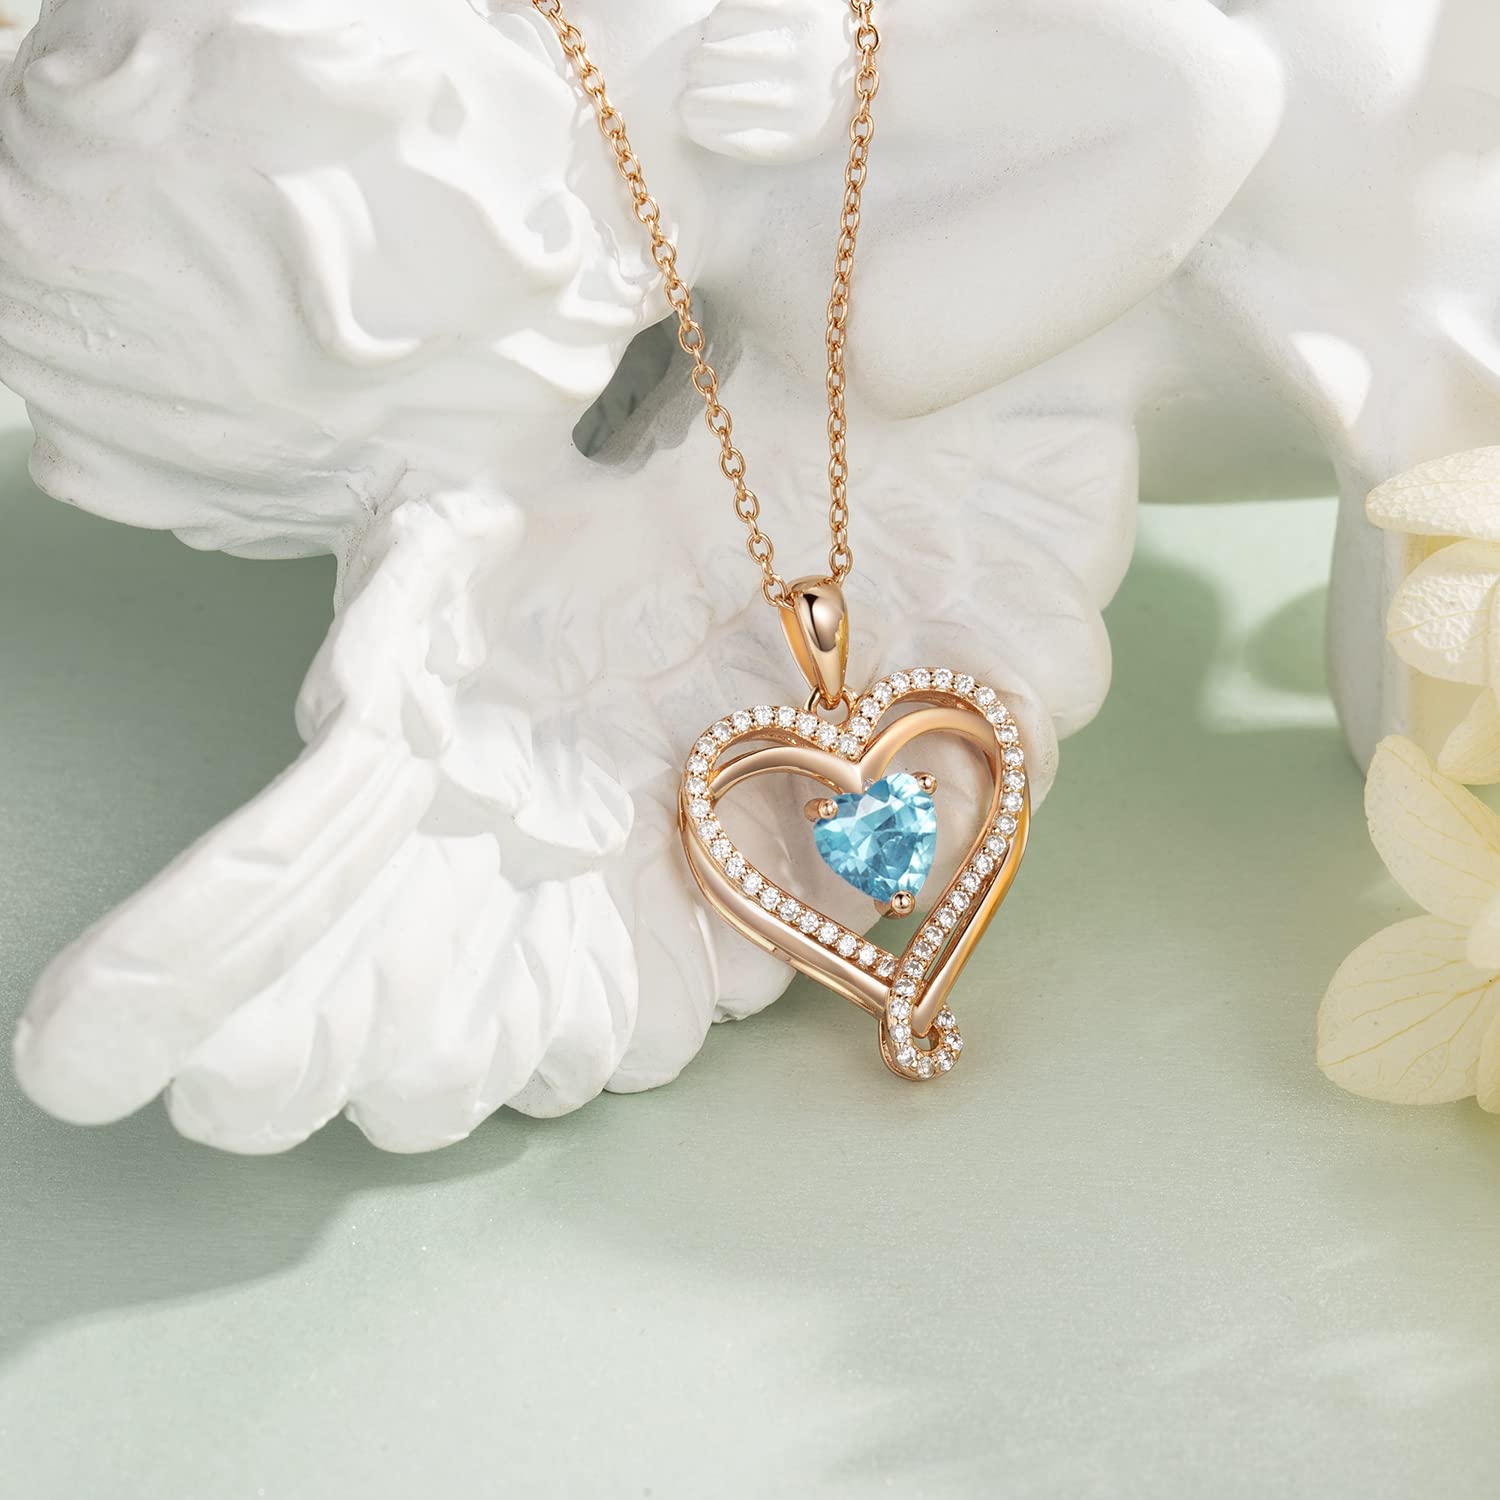 Infinity Heart Birthstone Necklace for Women 18K Rose Gold 925 Sterling Silver Birthstone Jewelry for Mom Daughter Wife Grandma Christmas Anniversary Birthday Gifts for Women Her from Husband Son Friend Diamond Pendant Necklaces